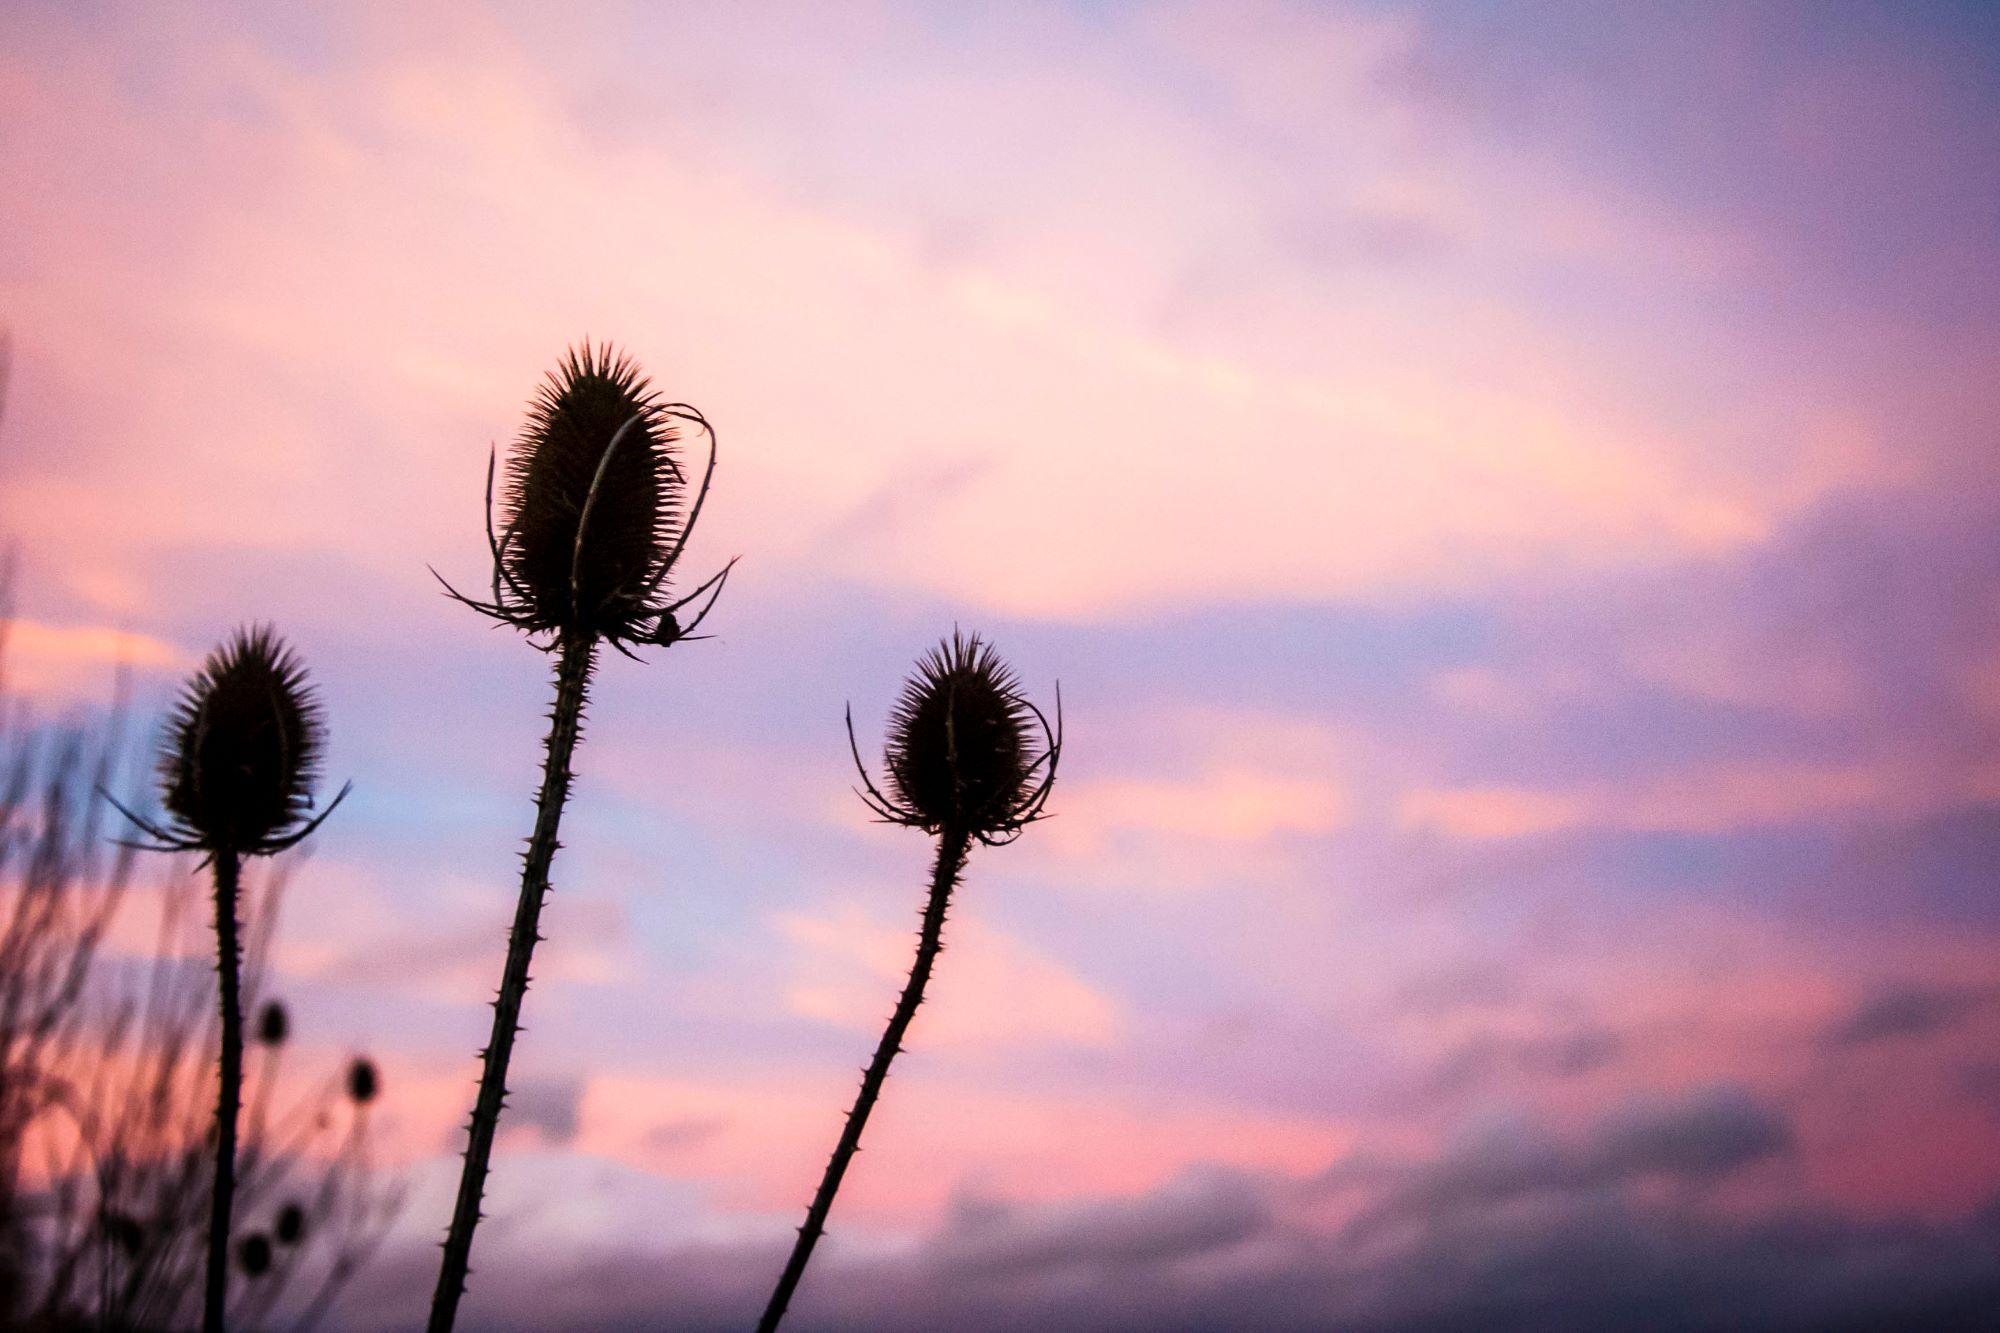 Three Teasels are silhouetted against a pink winter sunset sky.